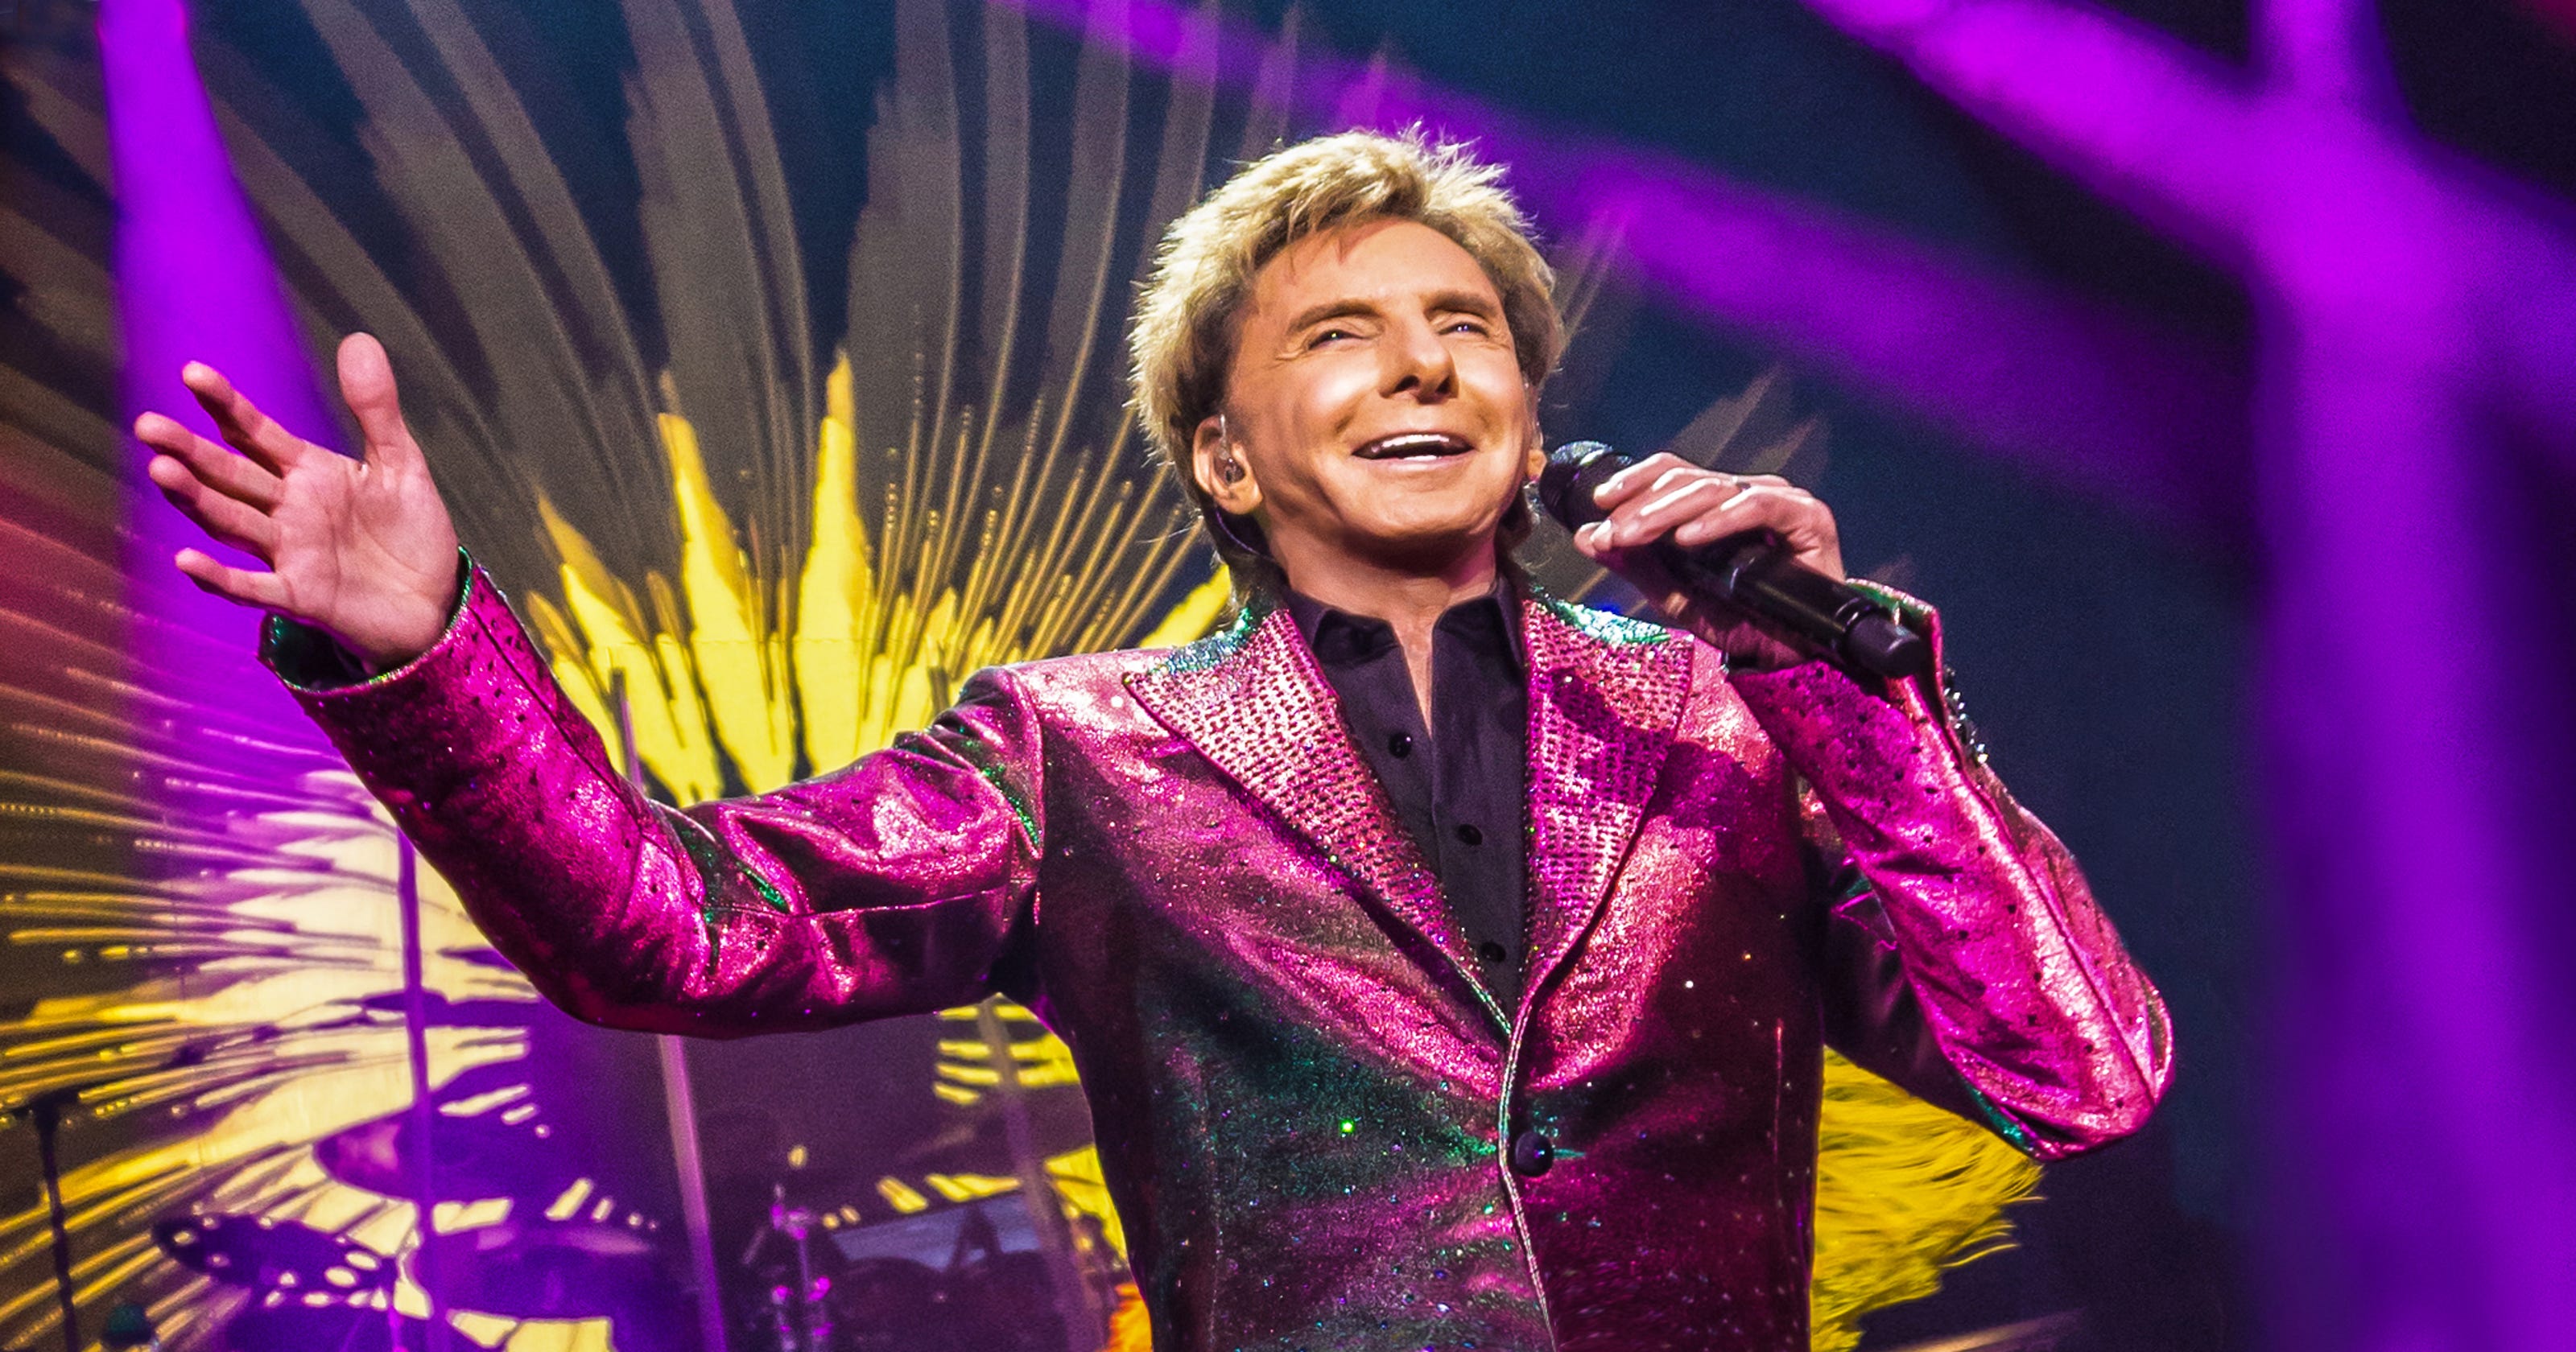 Barry Manilow was a reluctant pop star who didn't listen to the radio